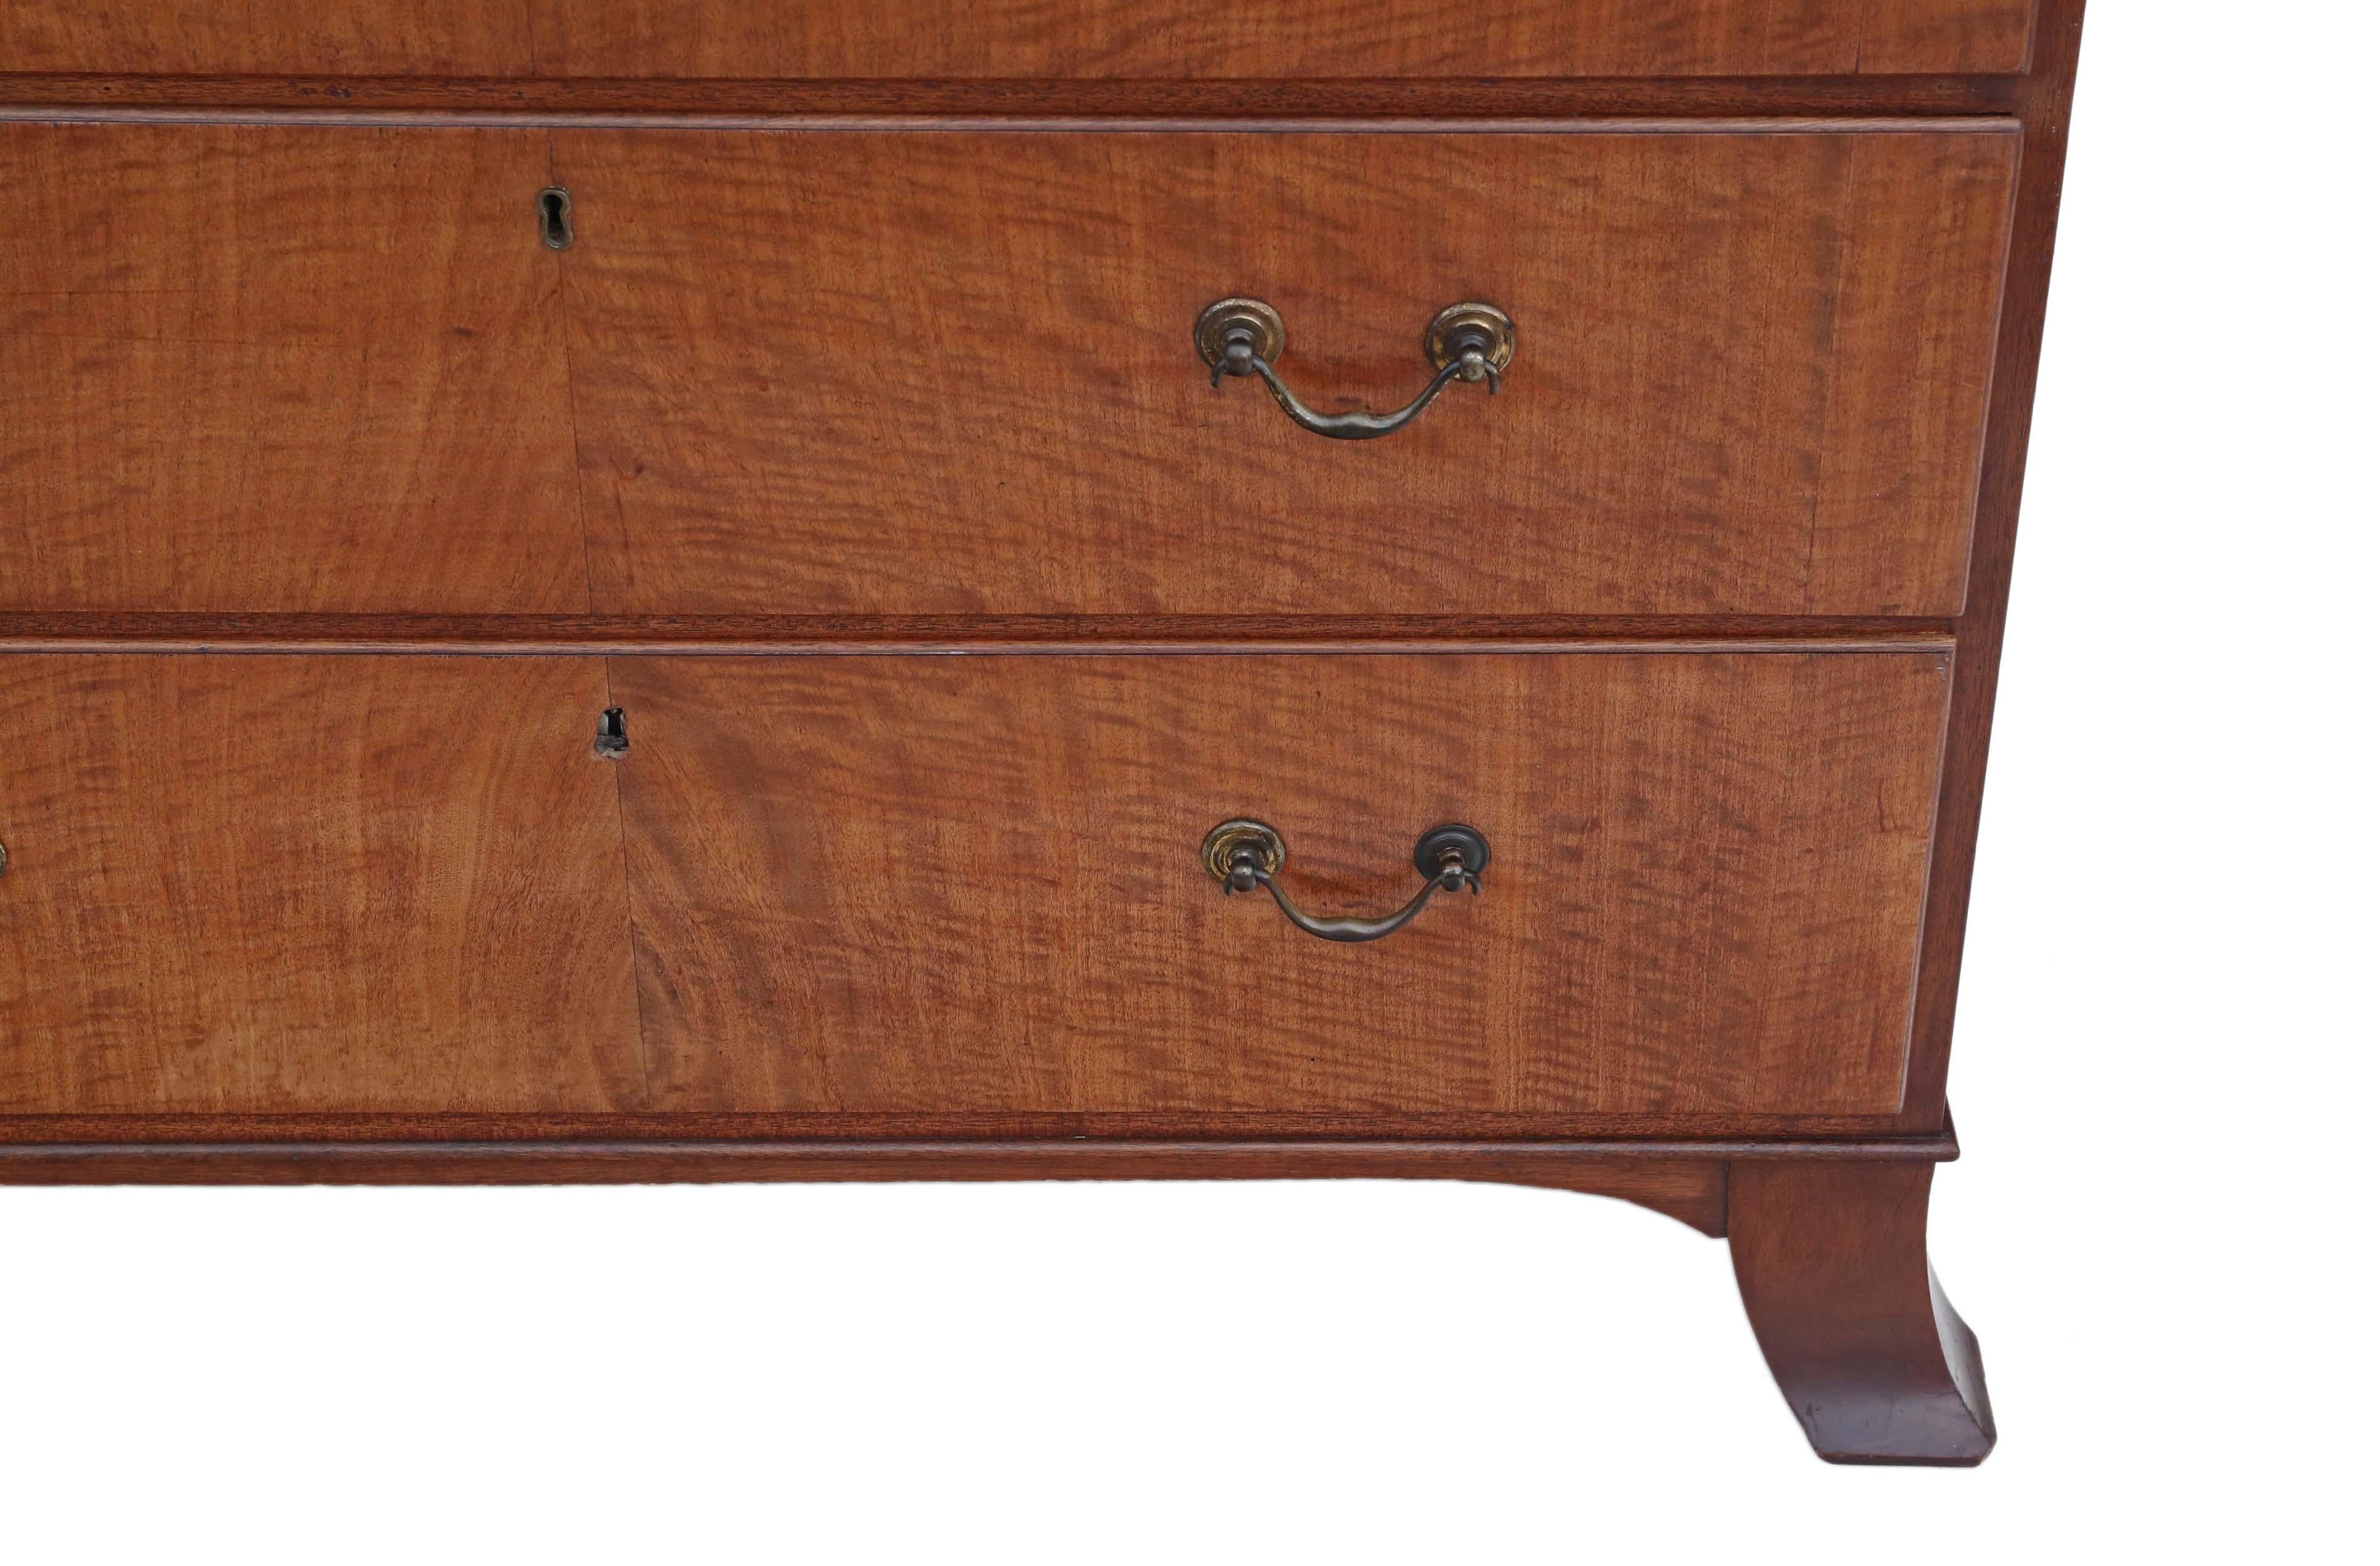 Antique 19th Century Inlaid Mahogany Tallboy Chest on Chest of Drawers For Sale 3